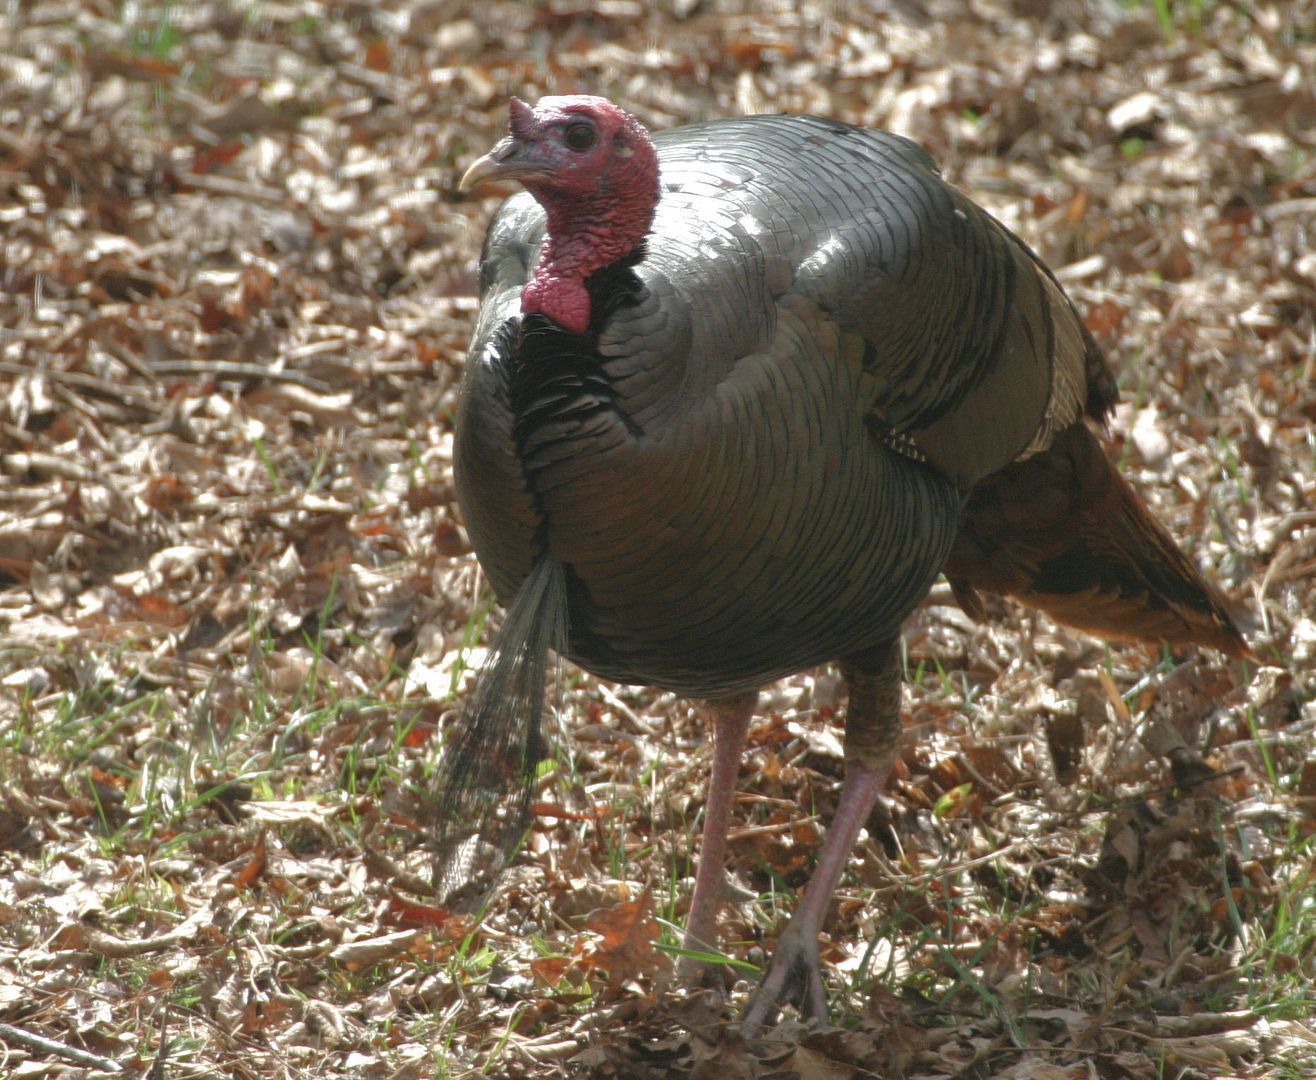 NC Spring Turkey Season Coming Soon Out Scouting with the long lens today